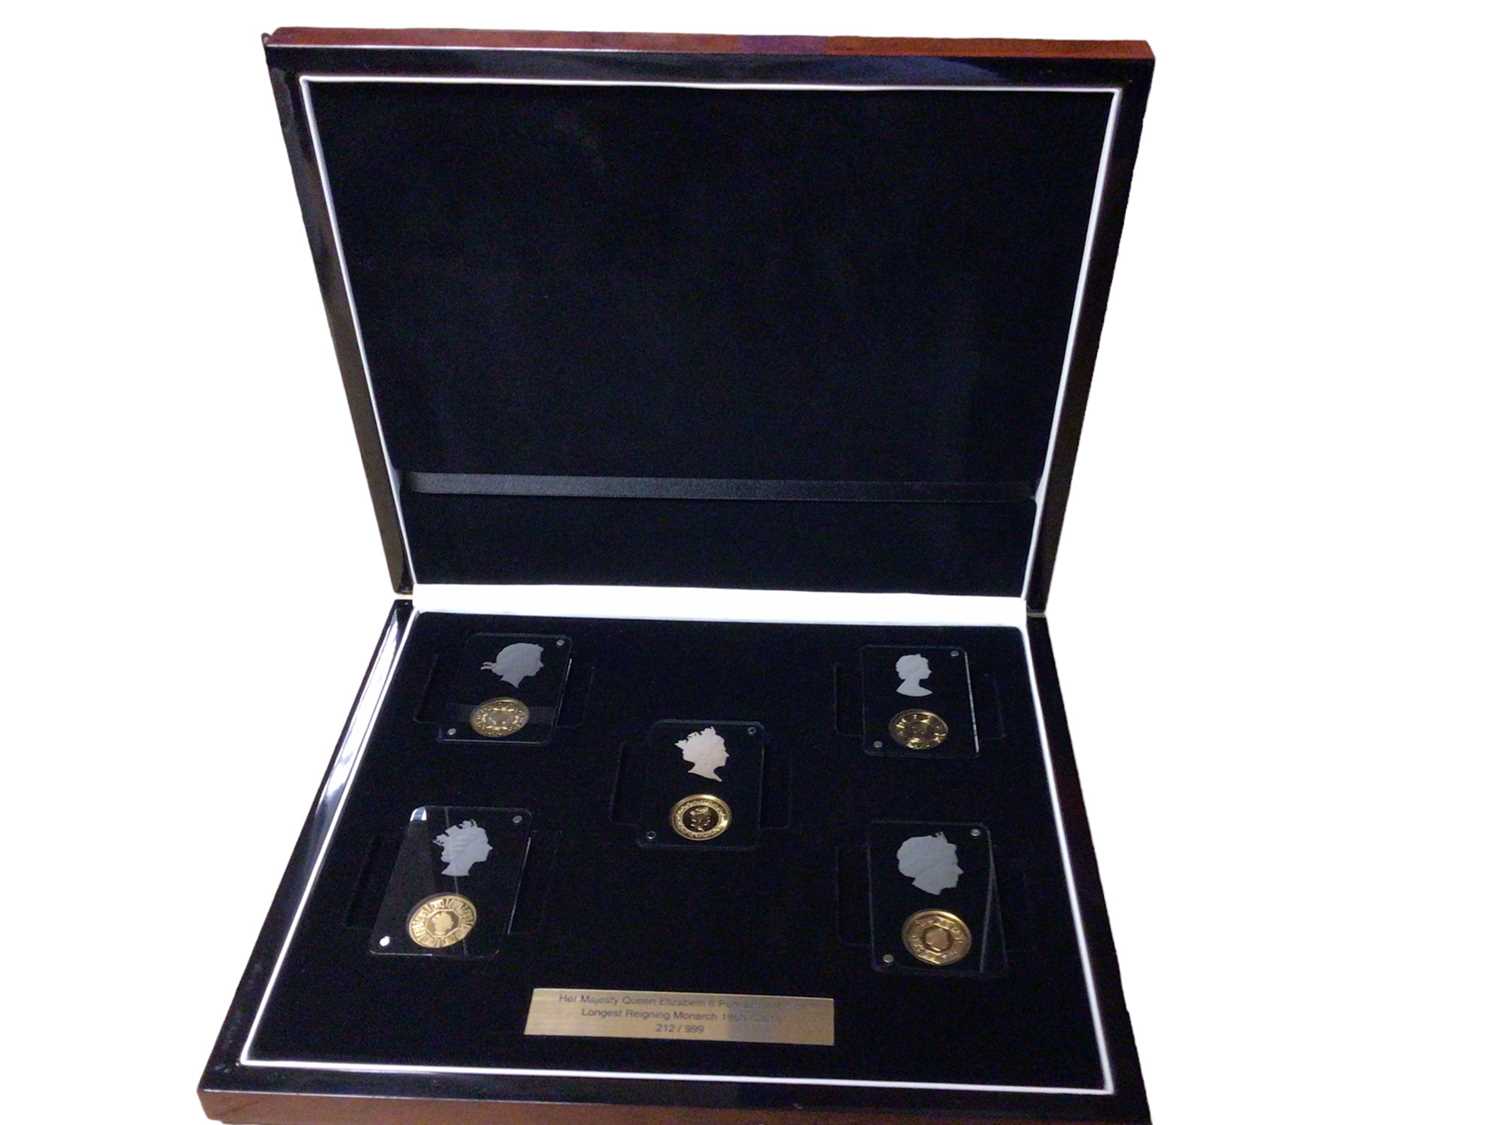 Lot 528 - Tristian Da Cunha - L.M.O. HM Queen Elizabeth II 'Longest Reigning Monarch' five Sovereign's 'Portrait Collection' 2015 (N.B. Cased with Certificate of Authenticity) (5 coin set)